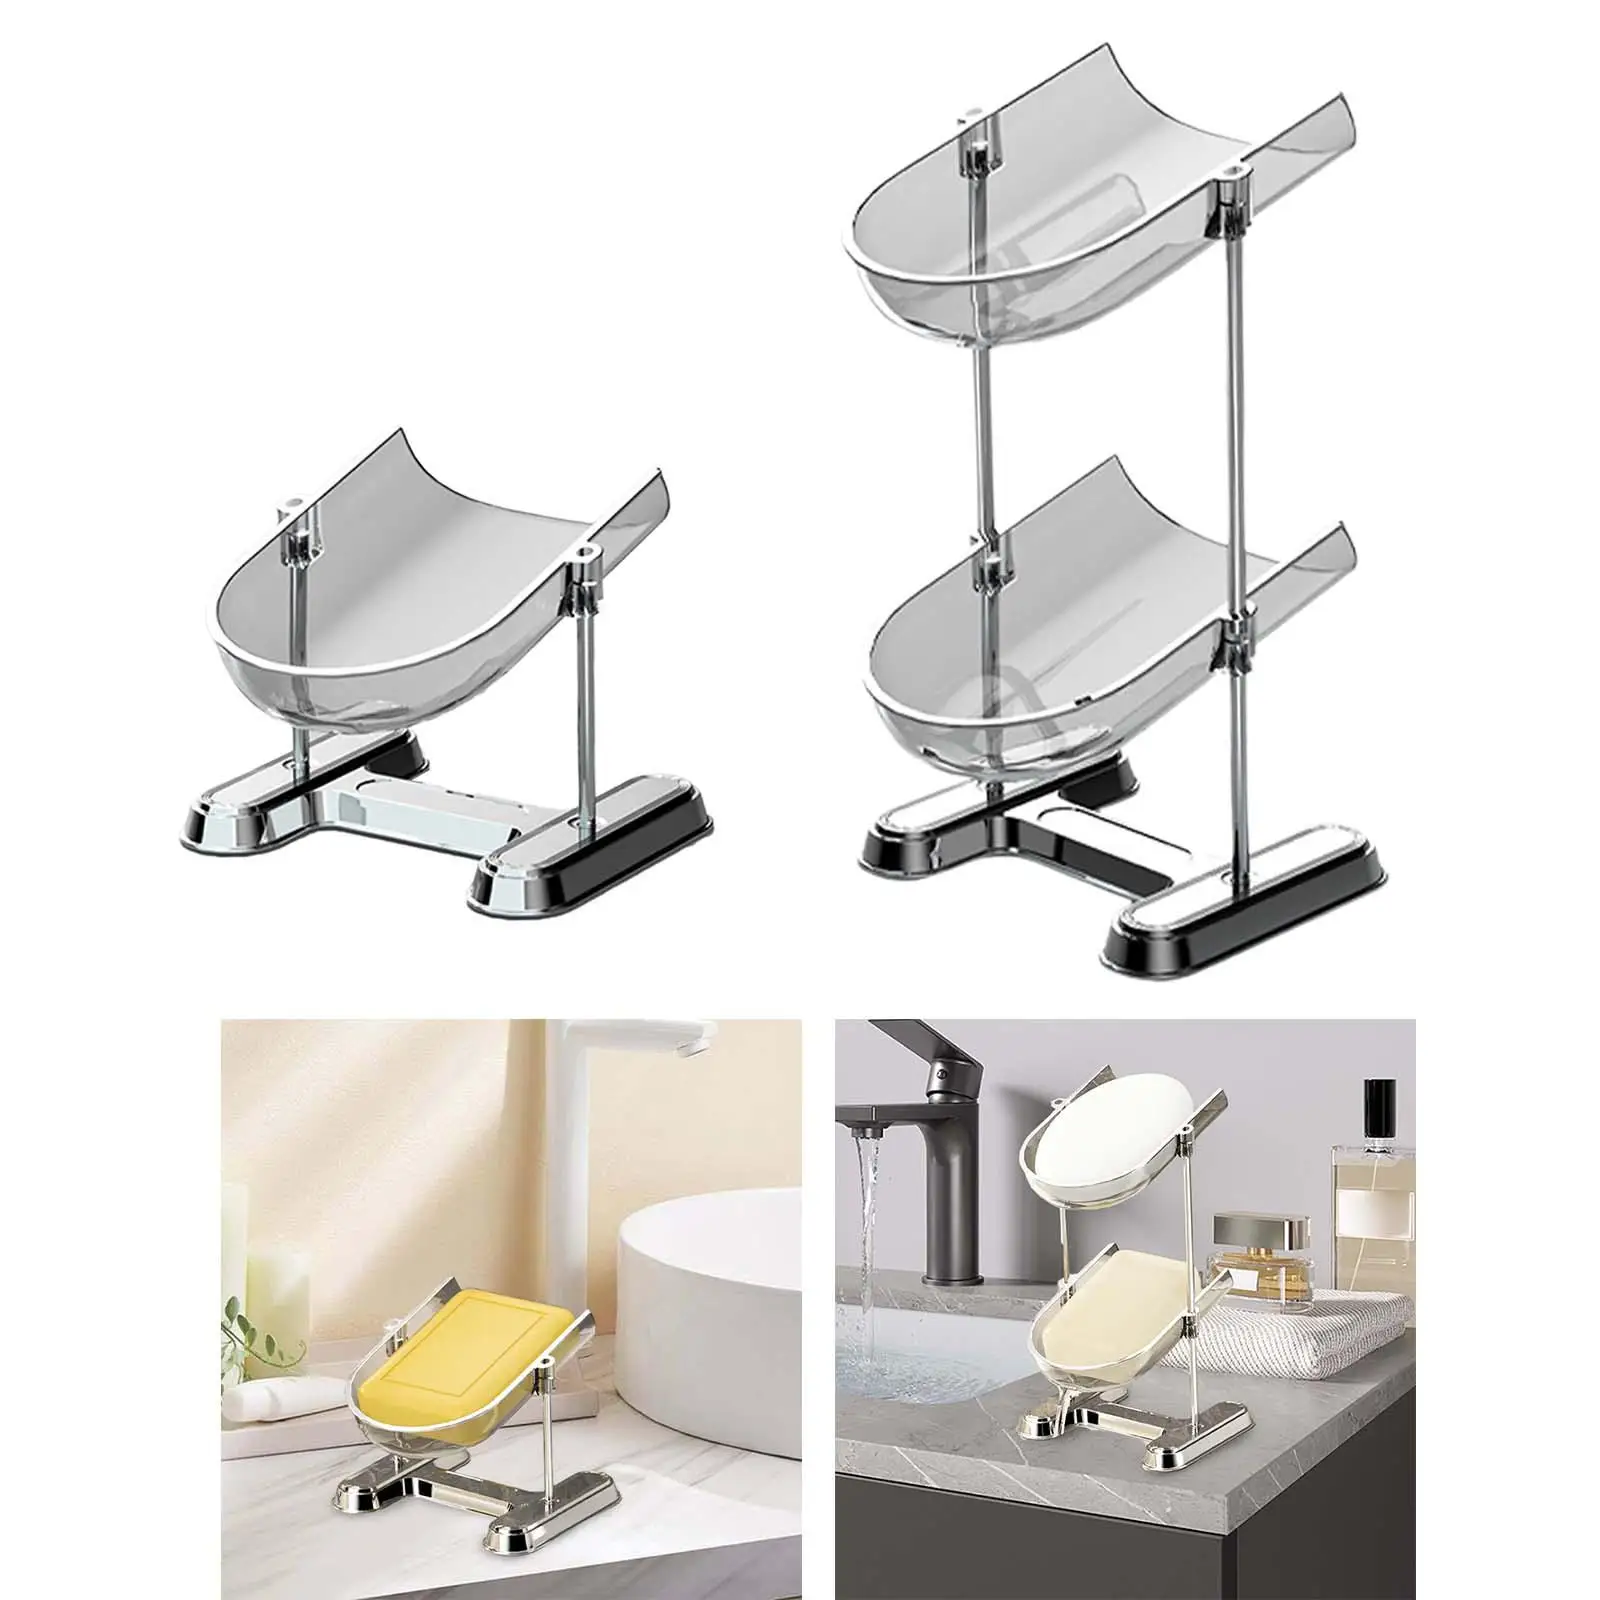 

Self Draining Soap Dish Soap Stands Easy to Clean Waterfall Soap Tray Soap Holder for Bathroom Countertop Kitchen Sink Bathtub